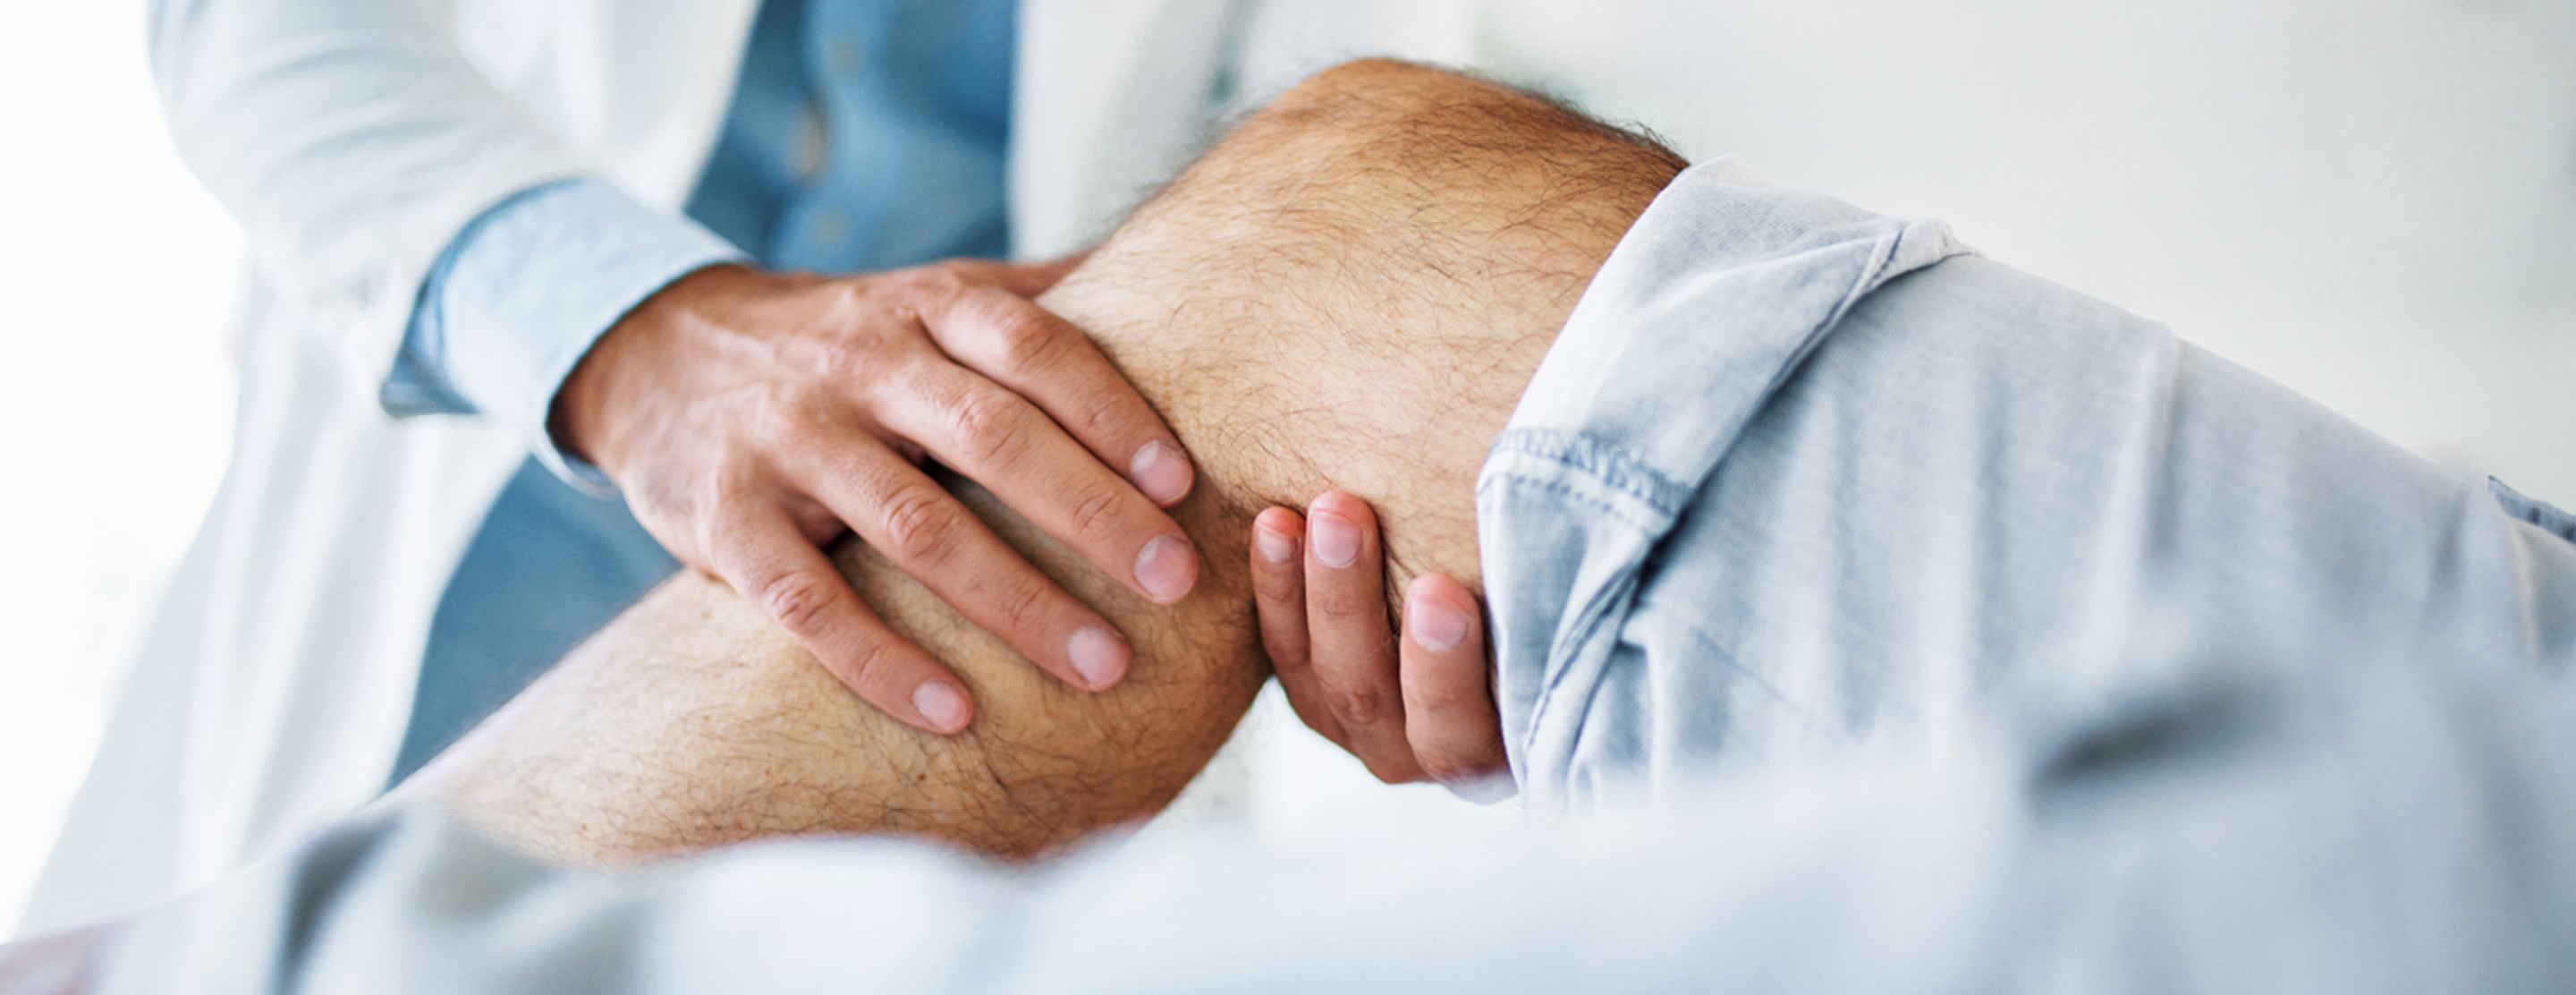 How to Elevate the Leg After Knee Replacement 